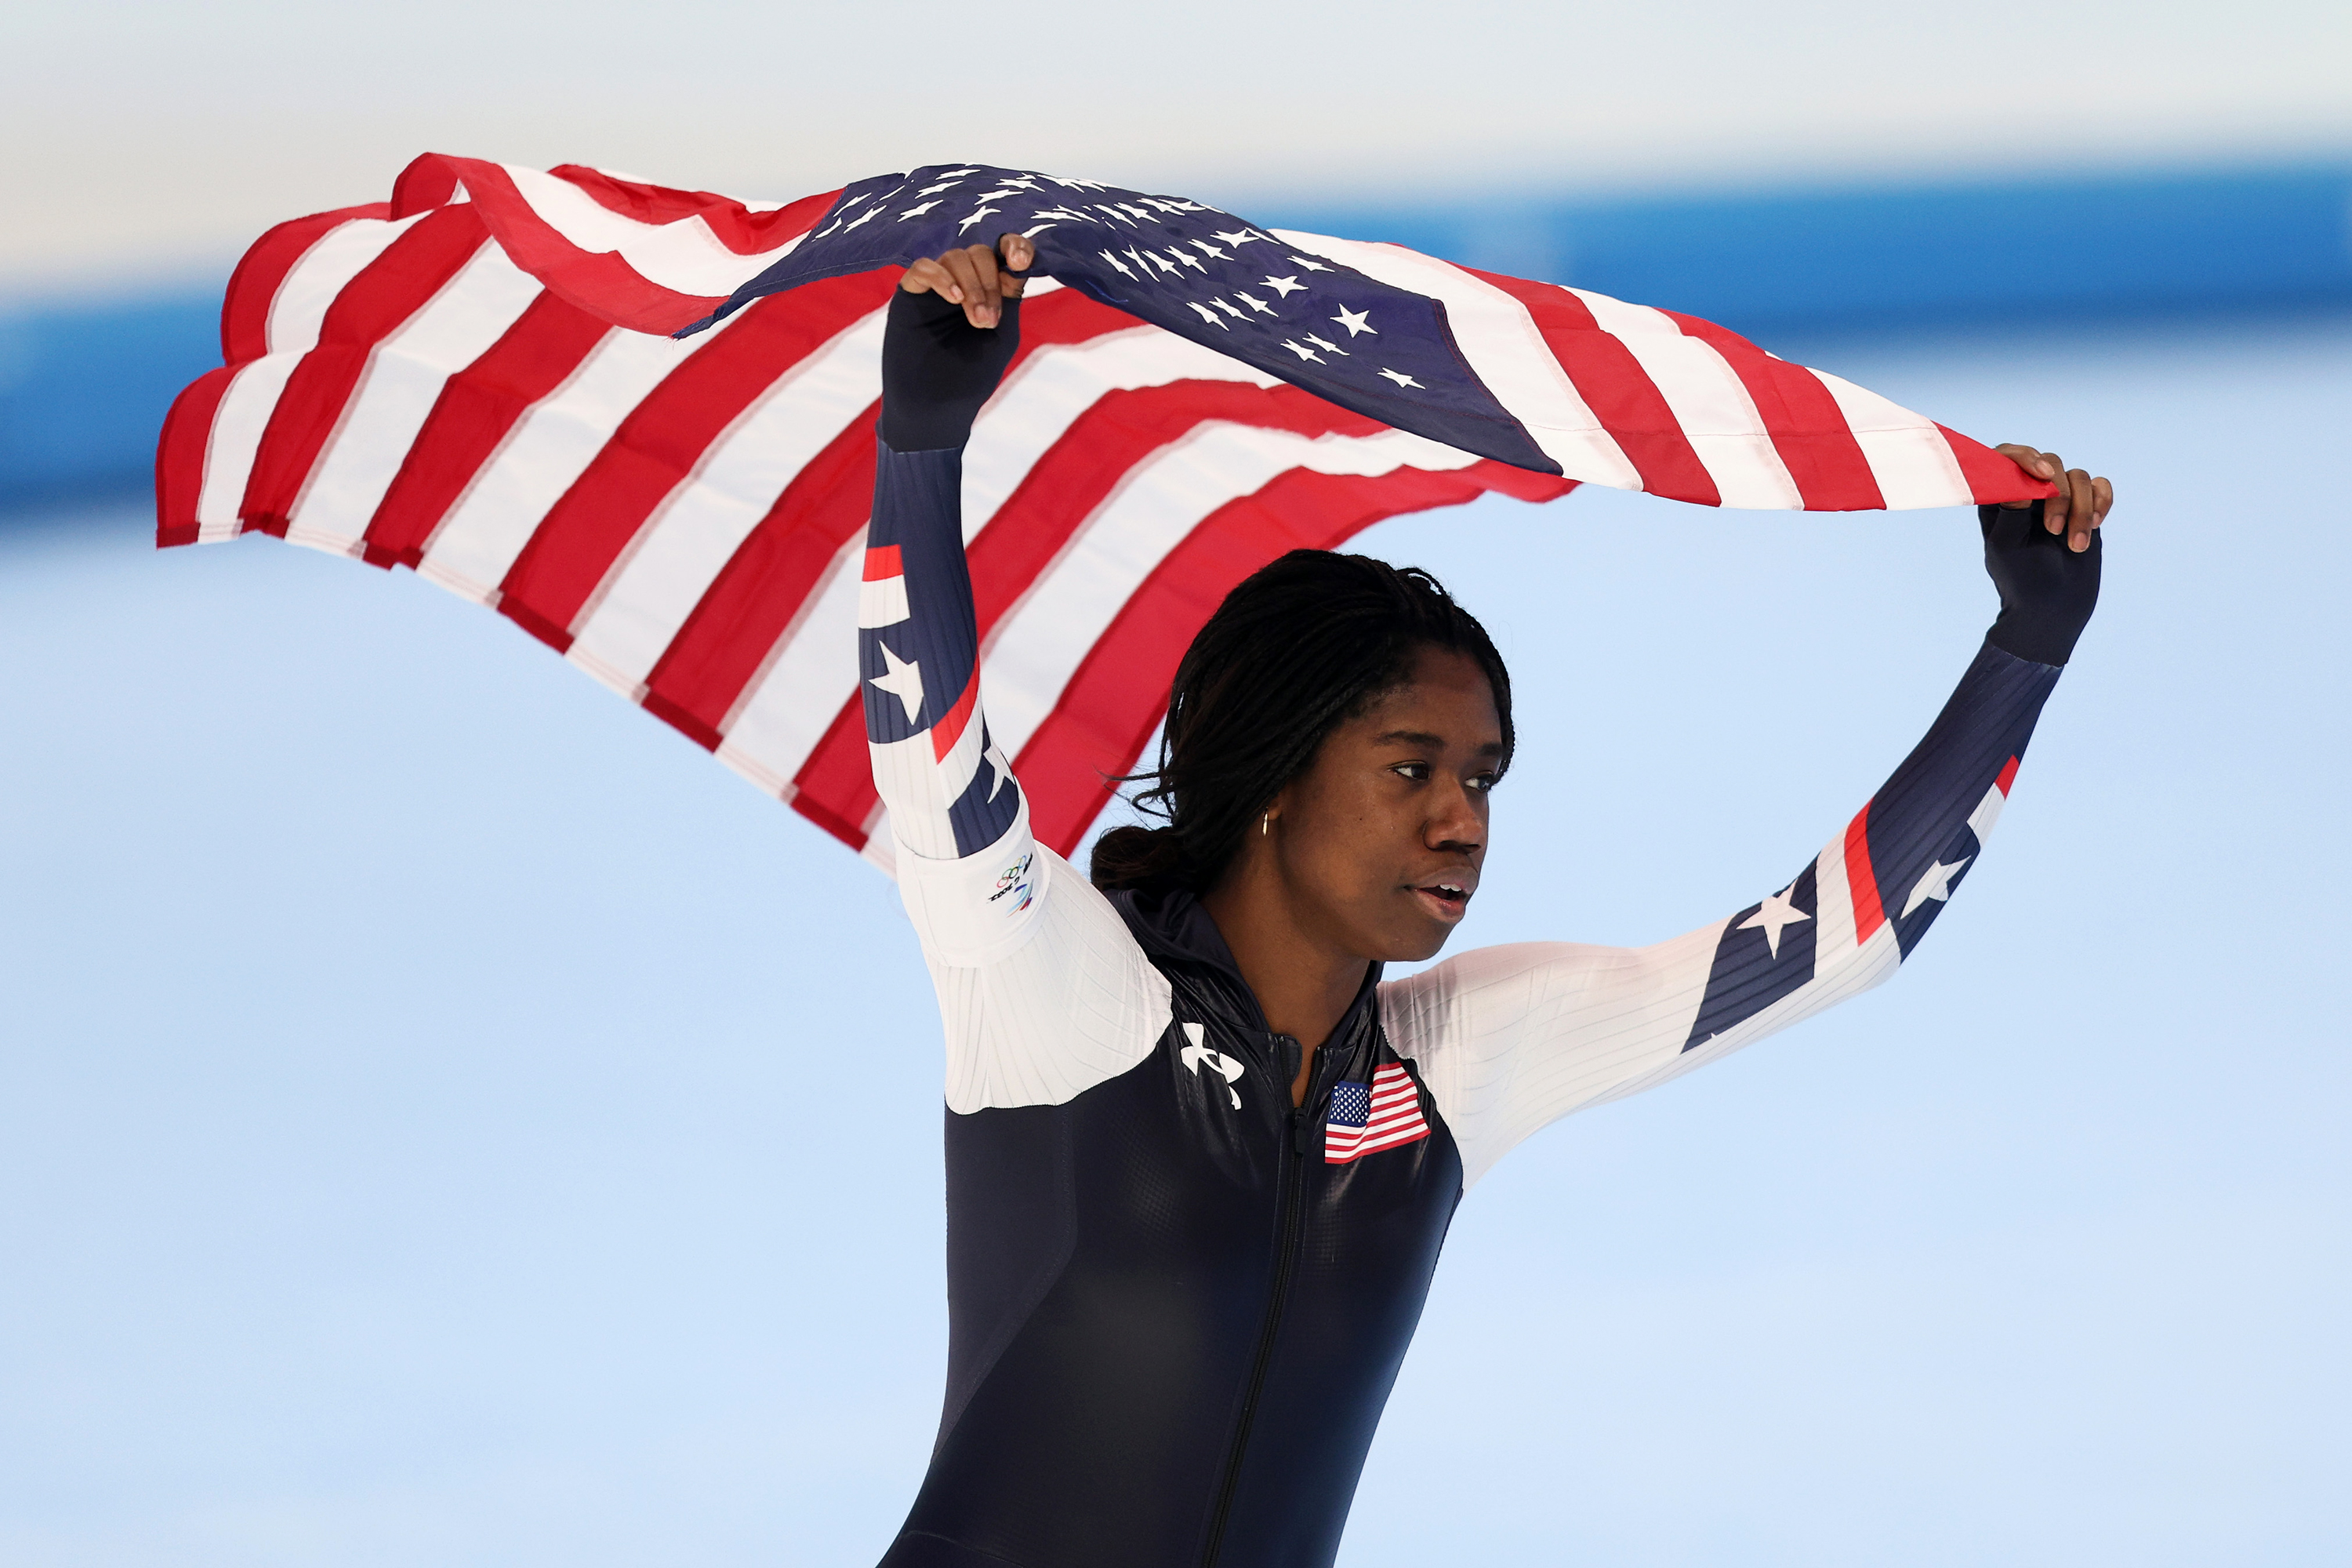 Erin Jackson of the United States celebrates after winning the gold medal for the women's 500m speed skating event on February 13.